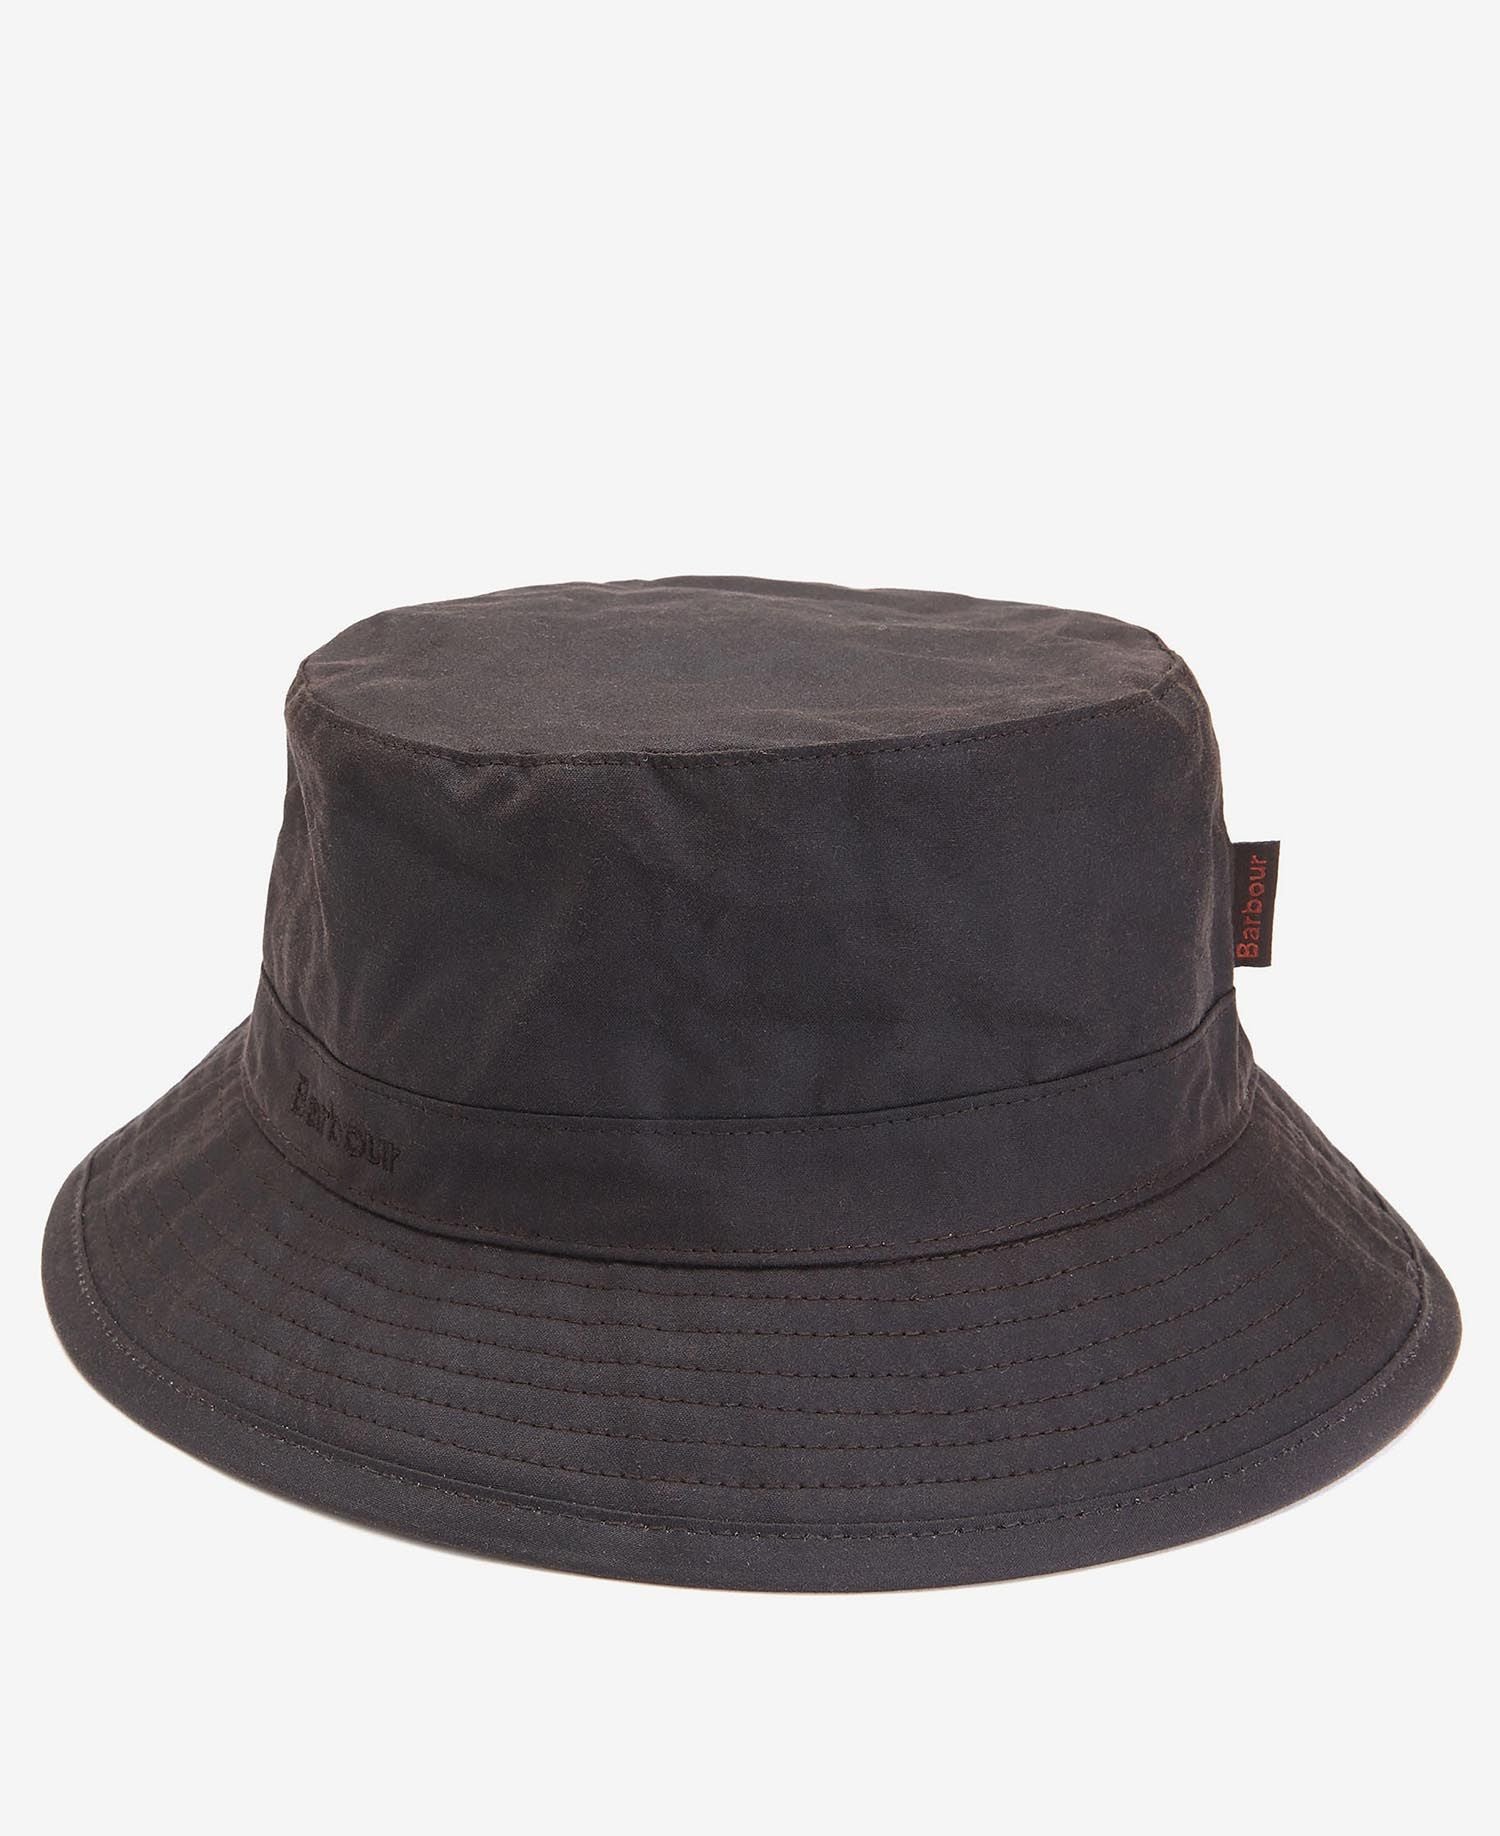 Barbour - Wax Sports Hat - Rustic